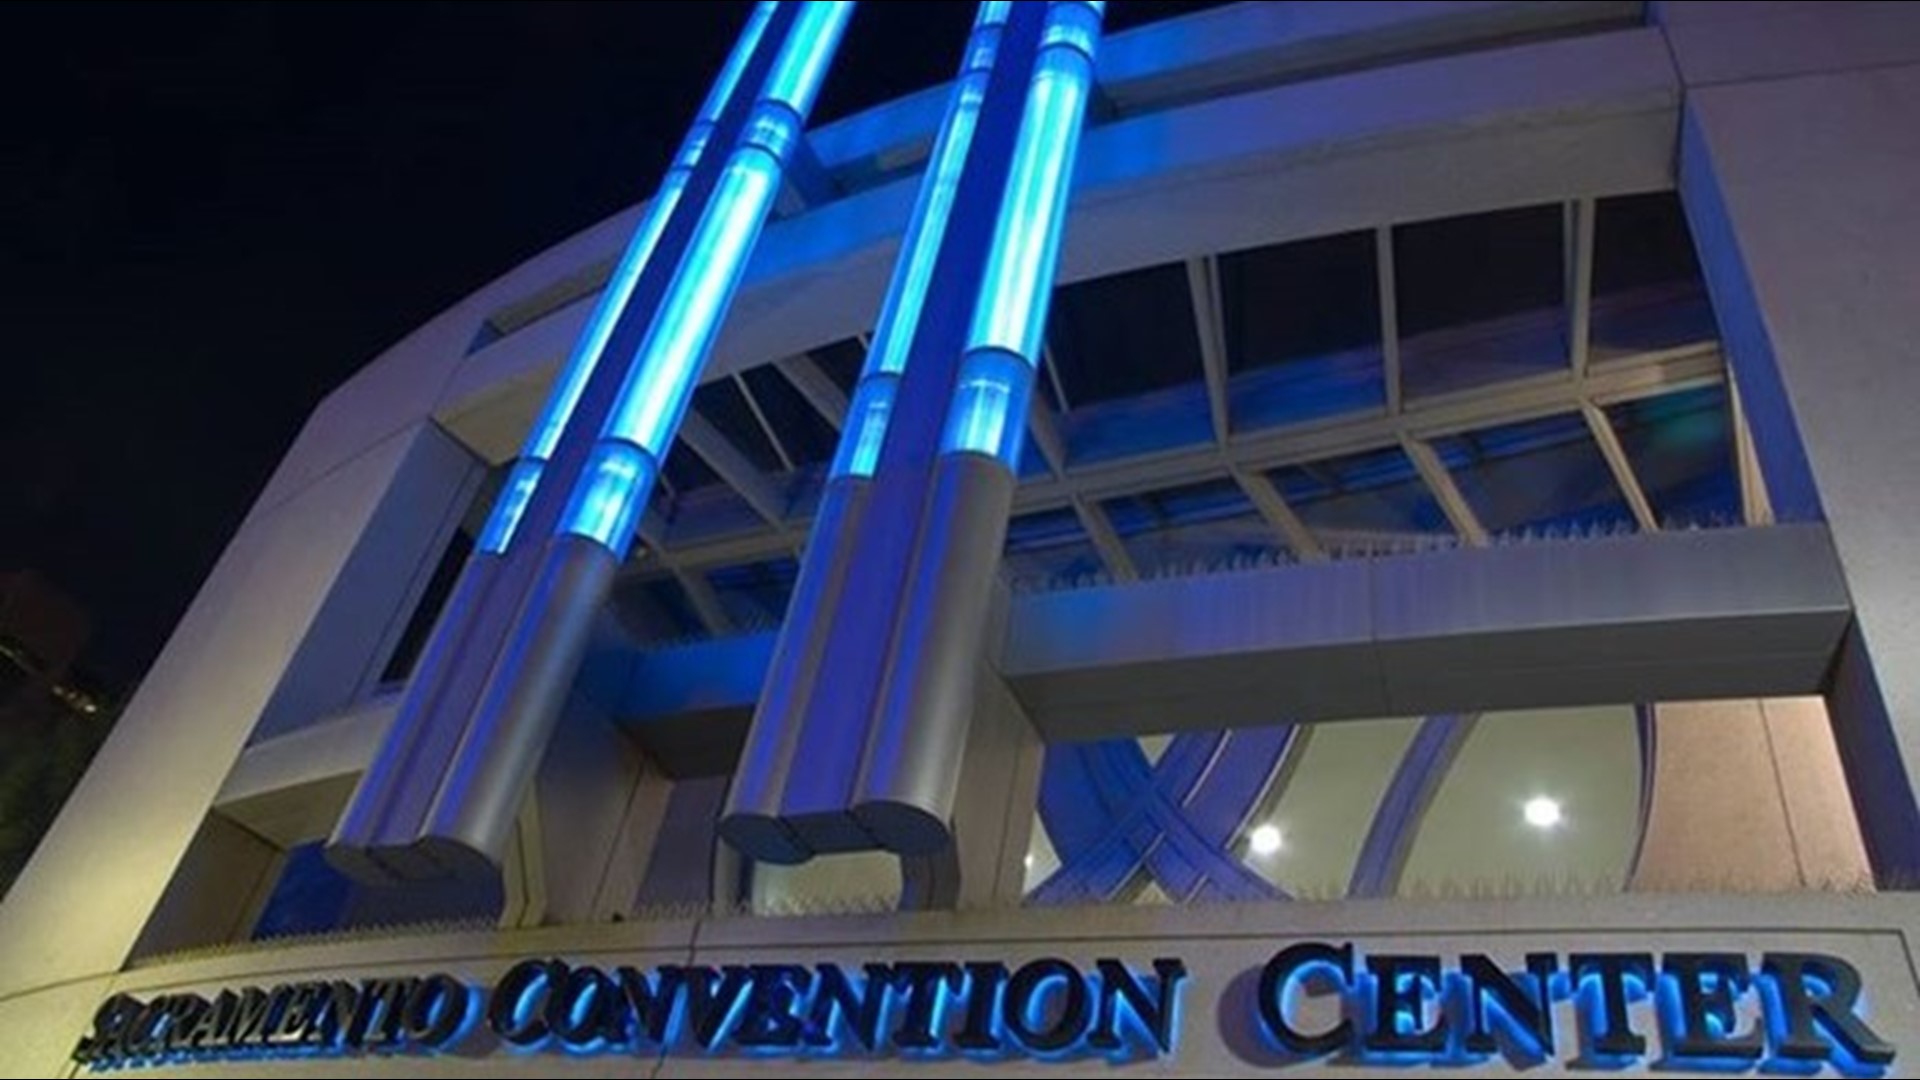 Visit Sacramento says they already have 14 groups of 5,000 people or less booked for conferences at the newly renovated Safe Credit Union Convention Center.